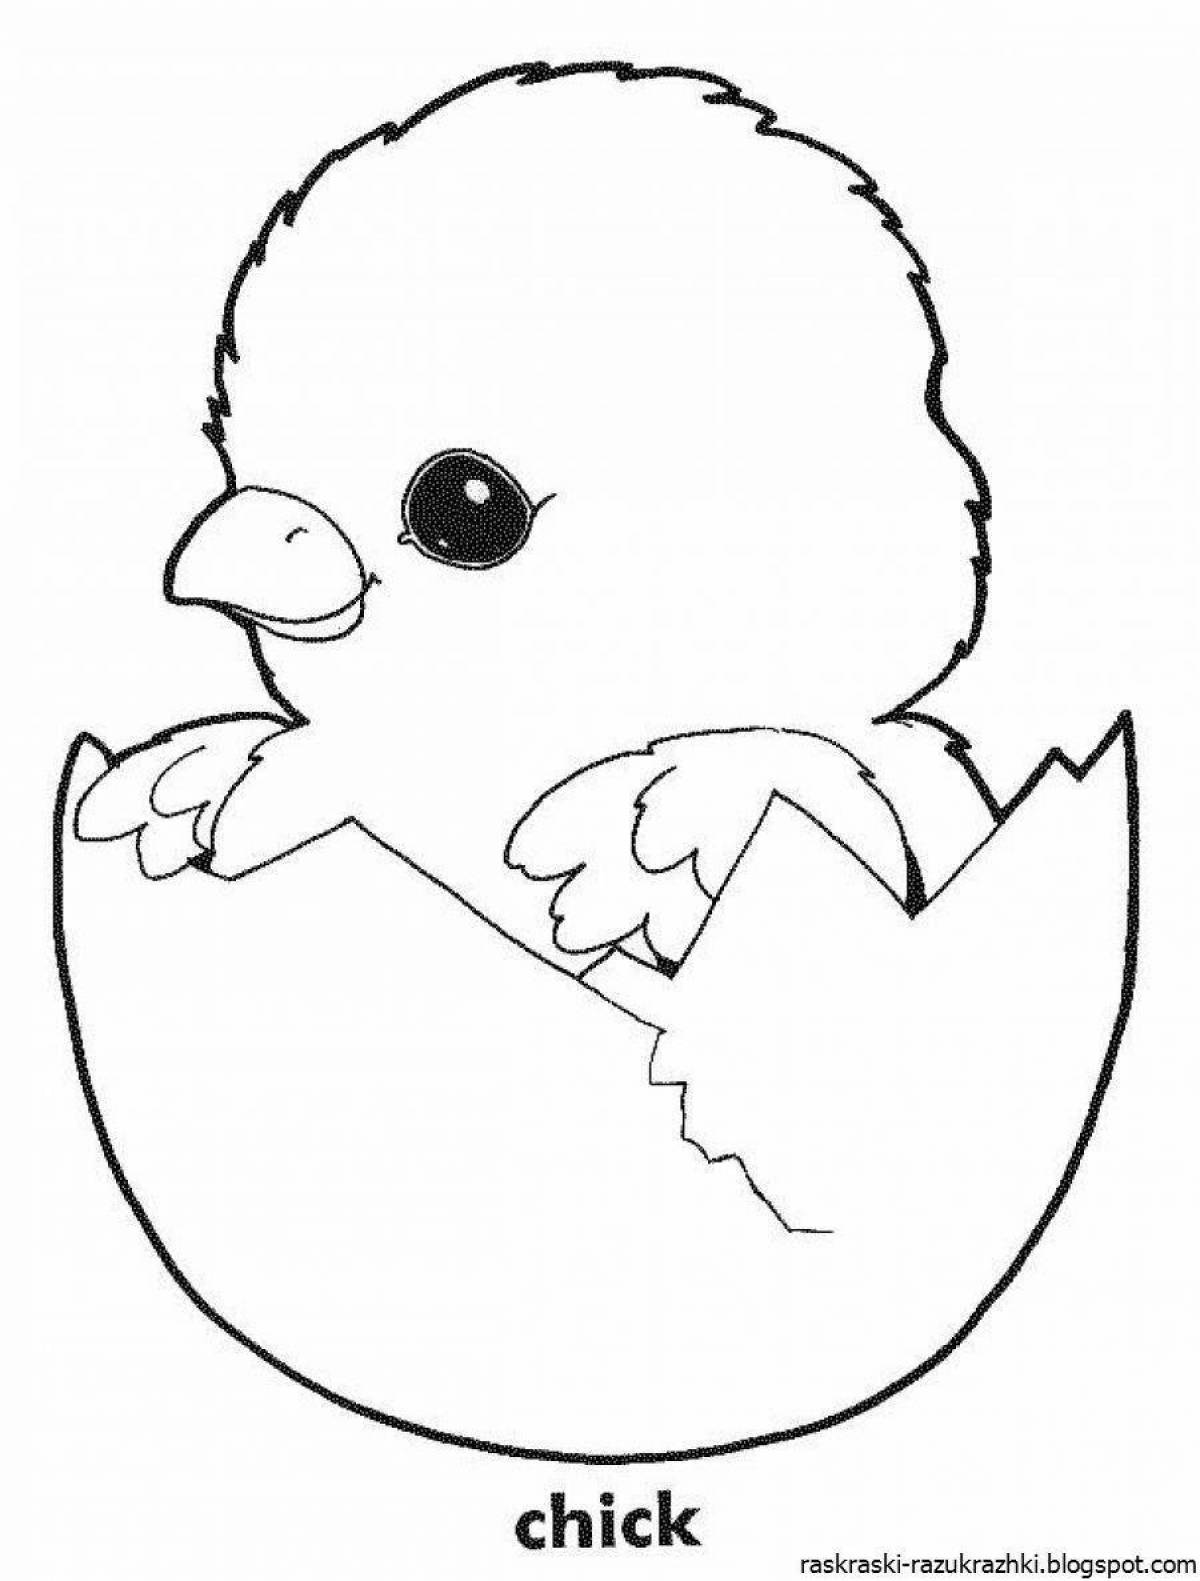 Delicate drawing of a chicken